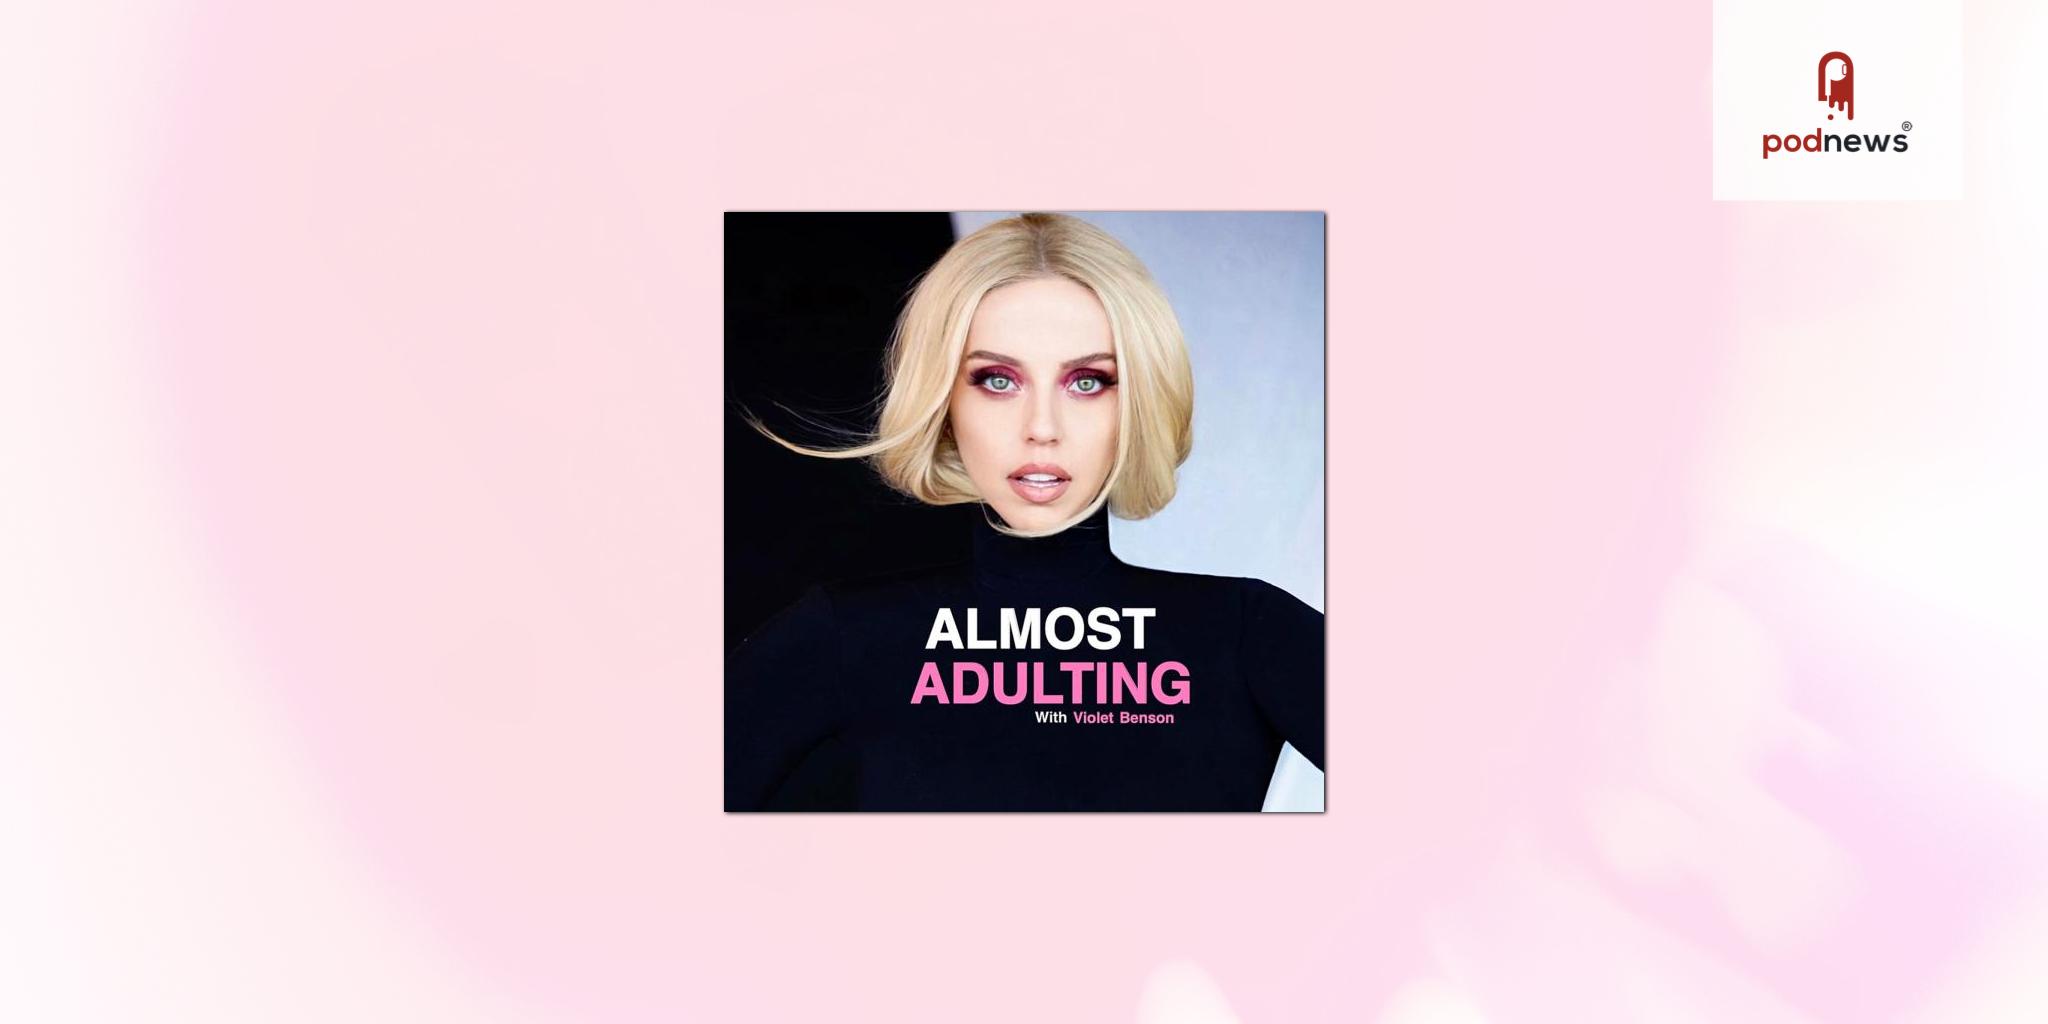 Gumball adds 'Almost Adulting with Violet Benson' to its growing roster of acclaimed podcasts